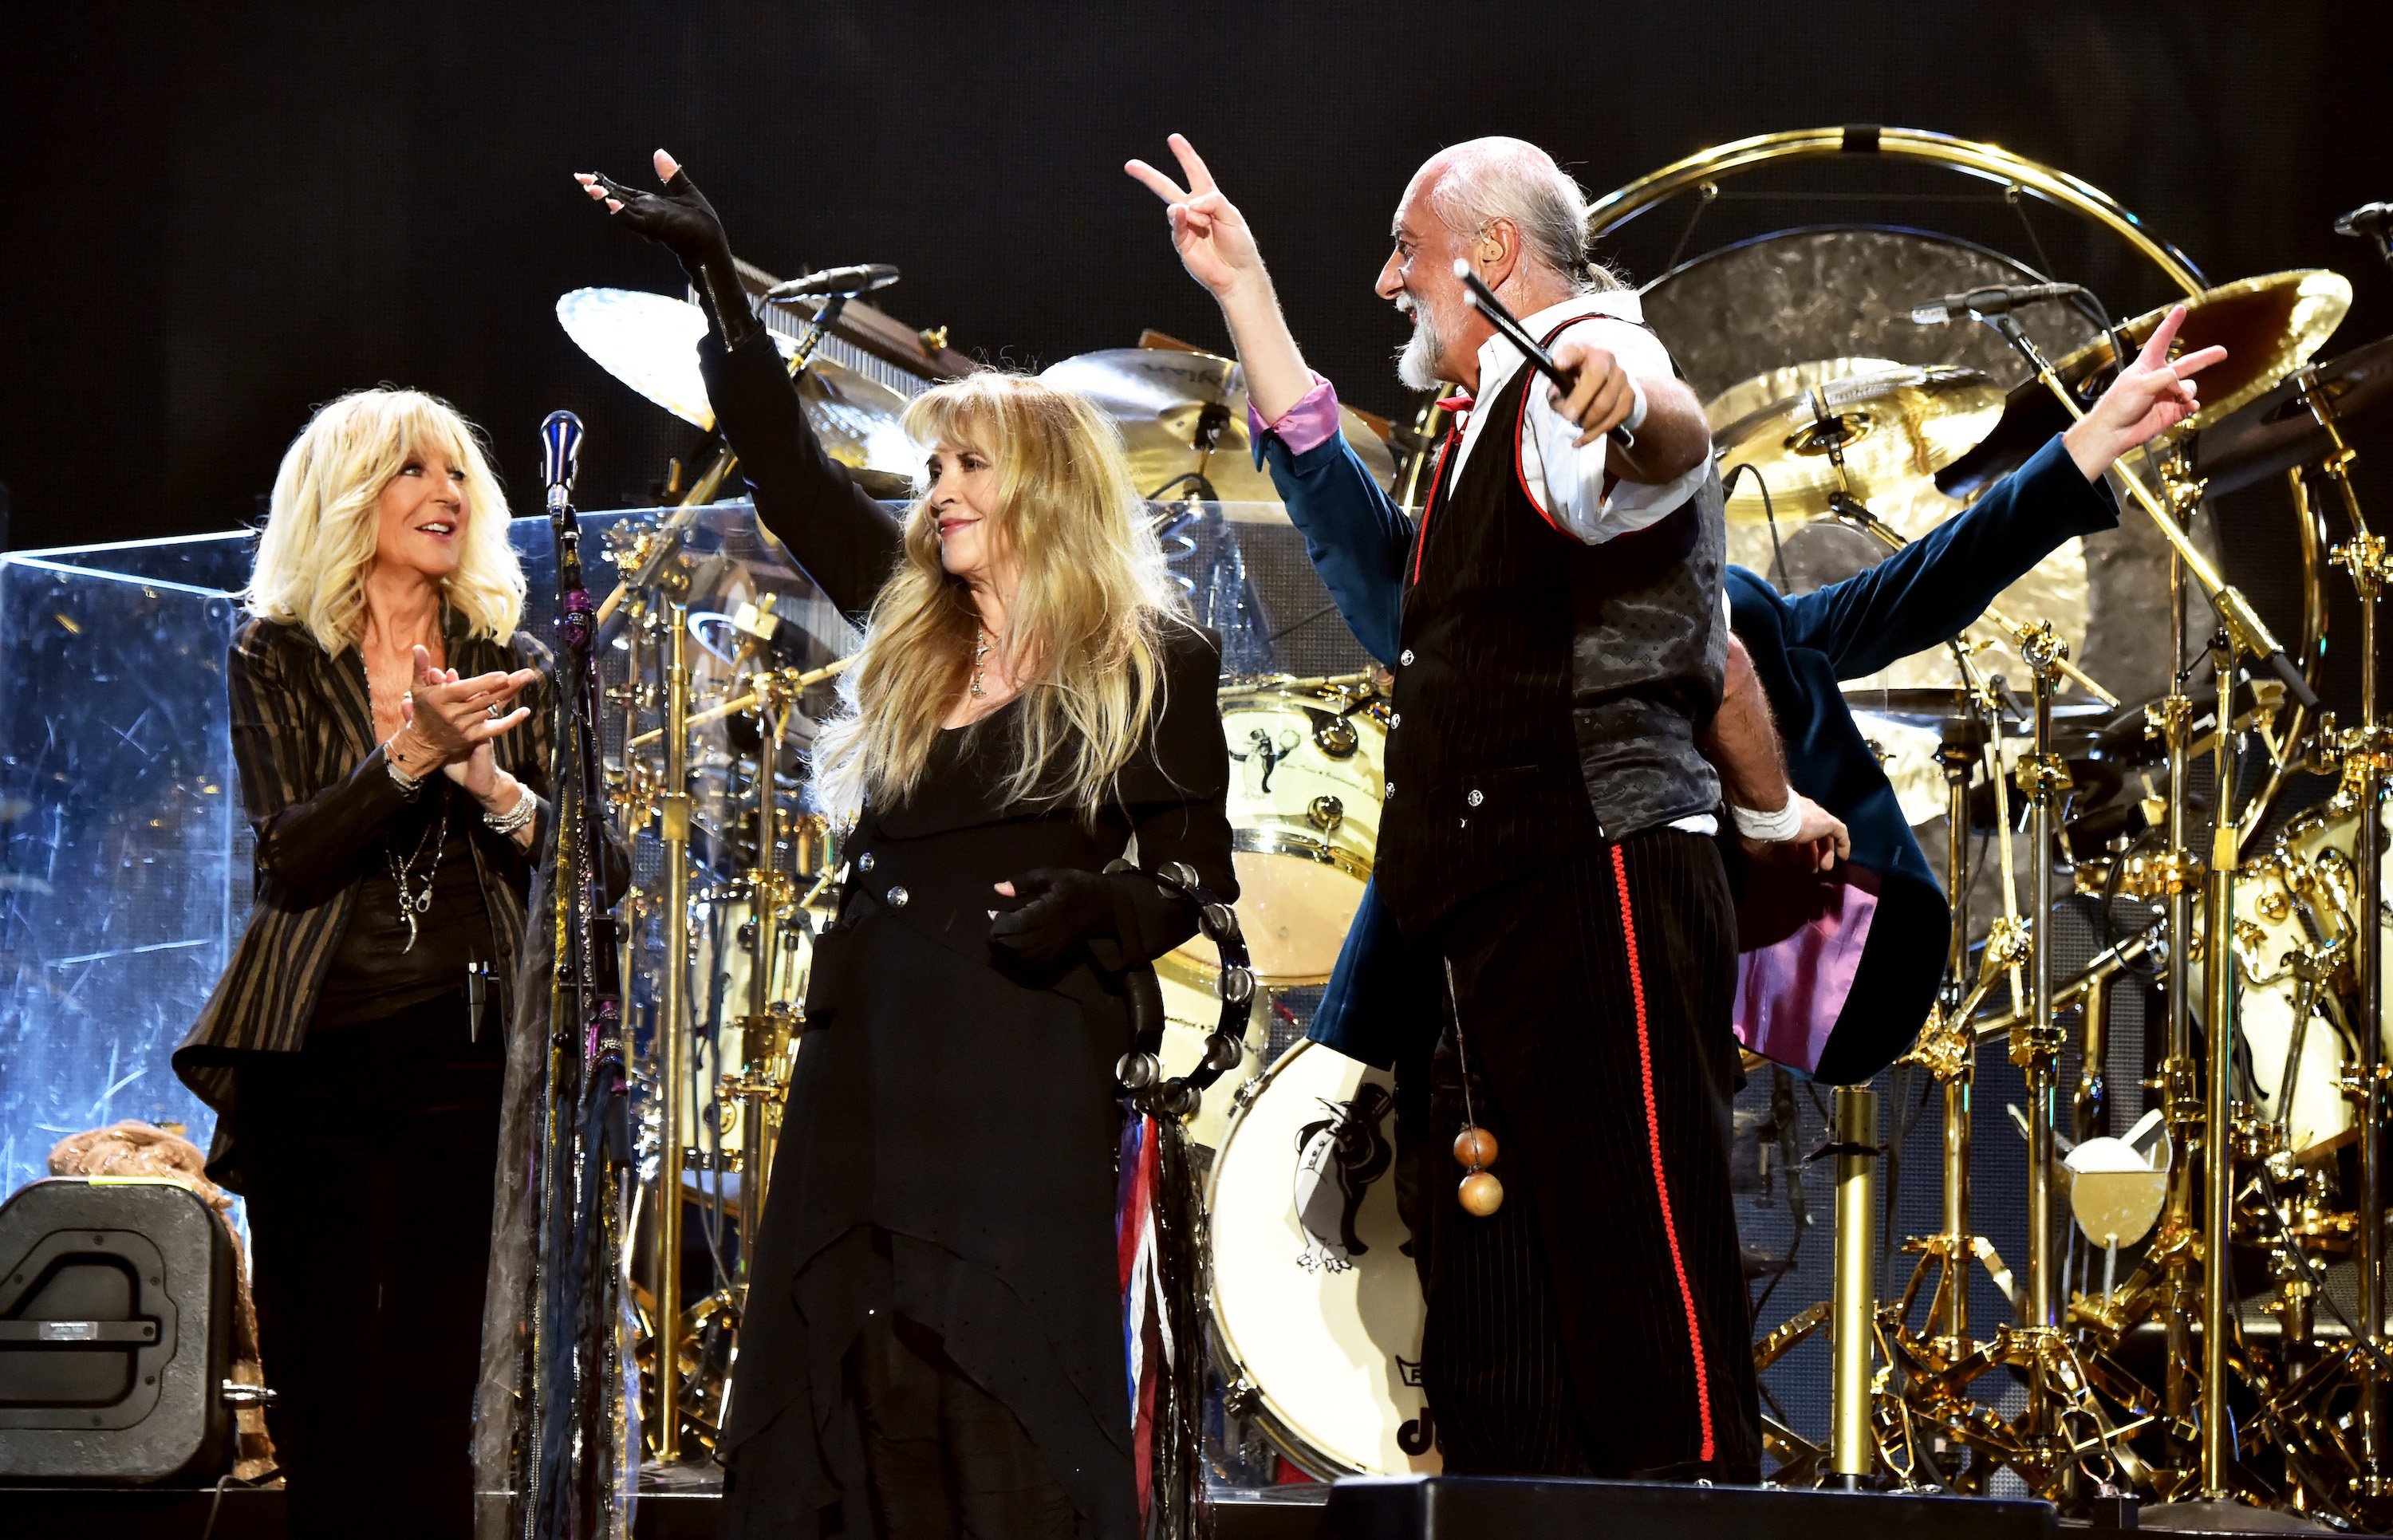 Stevie Nicks and Christine McVie performs during the 2018 iHeartRadio Music Festival